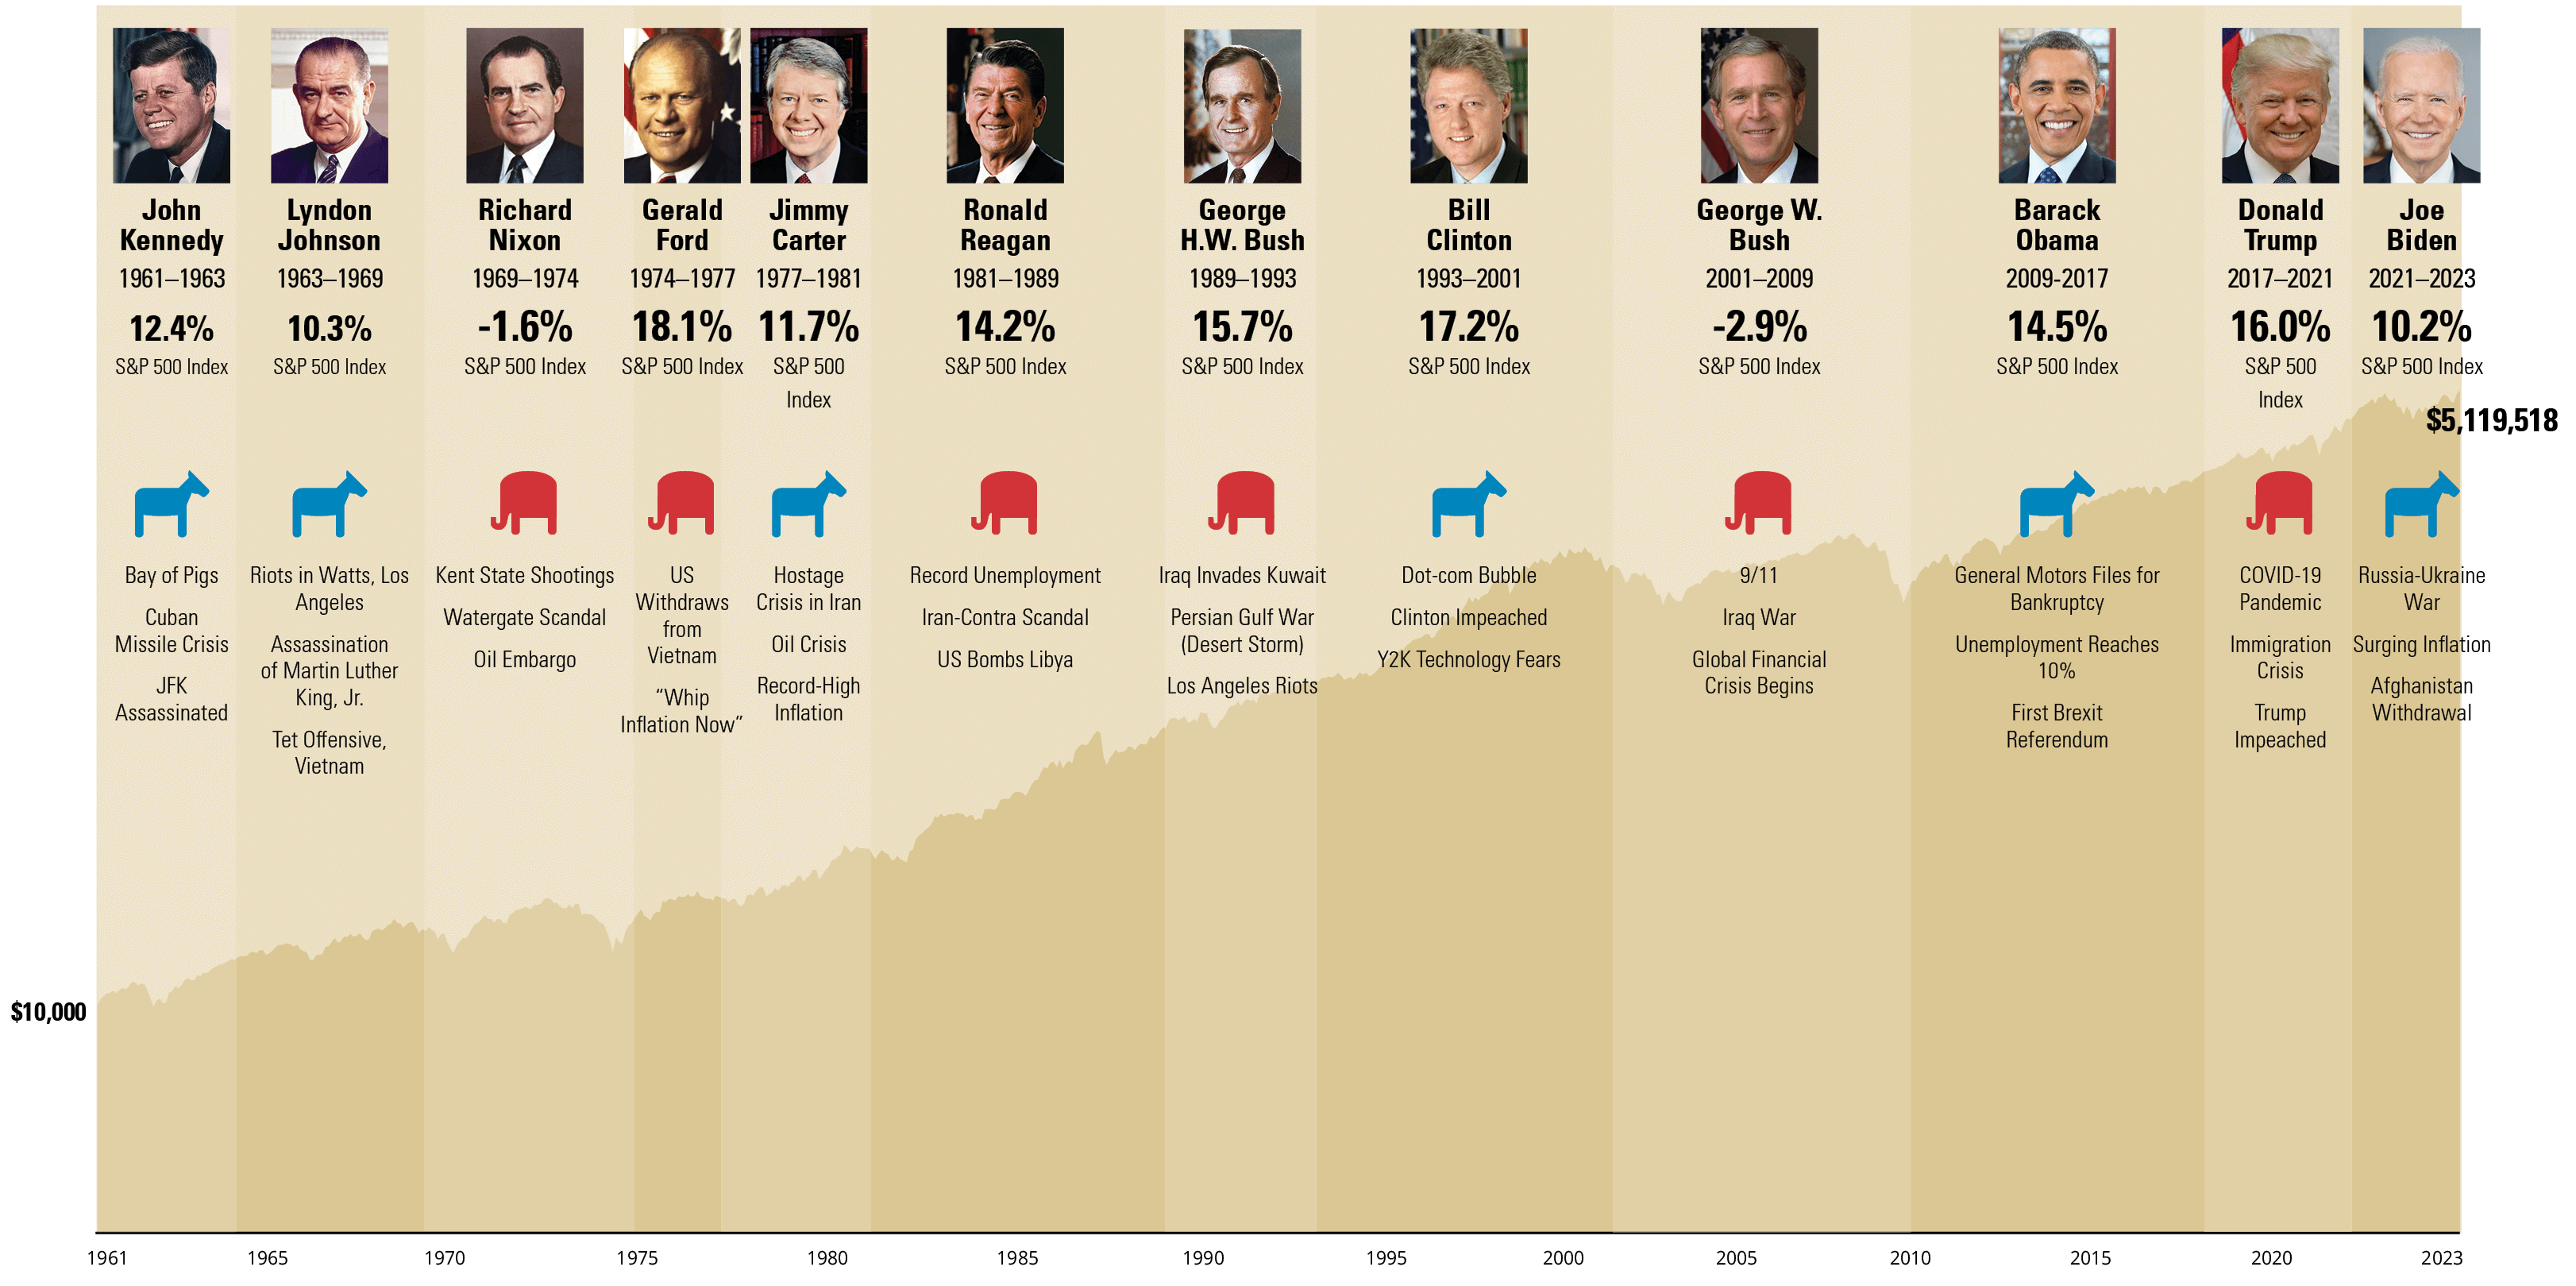 Growth of S&P 500 Index with Presidential Terms